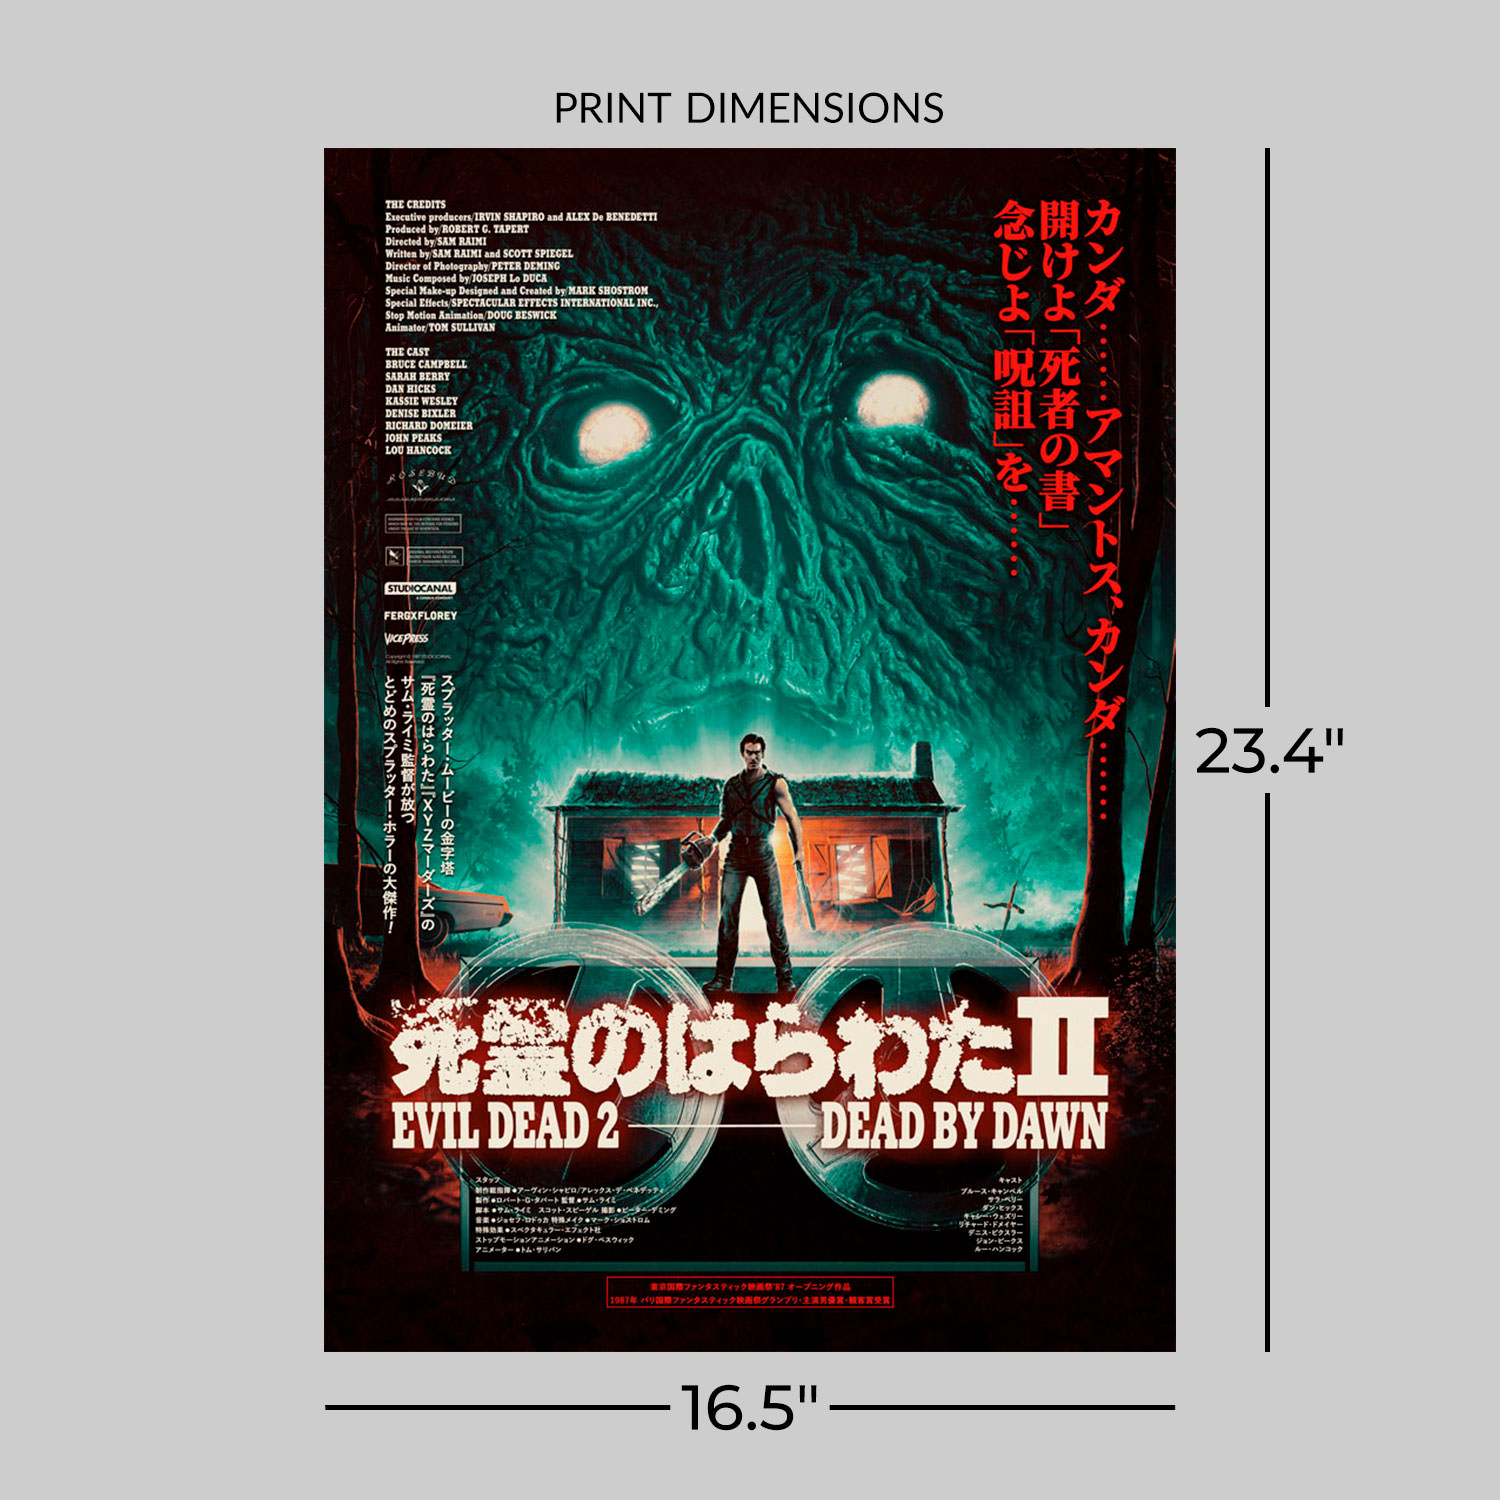 Evil Dead 2 Movie/show Poster Wall Art Printed & Shipped 